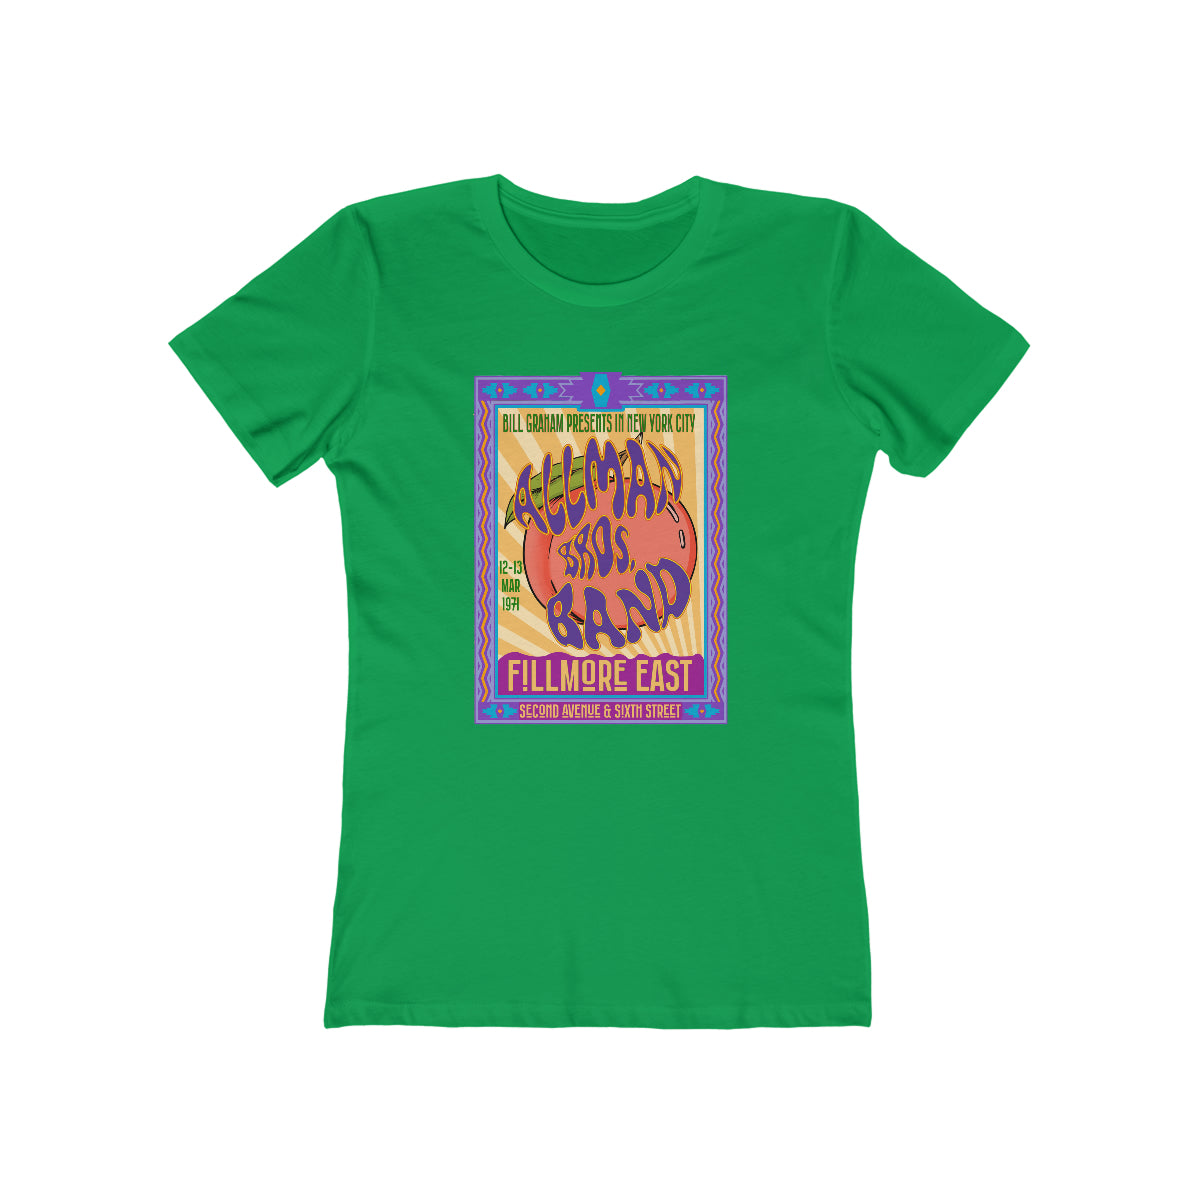 Allman Brothers at the Fillmore East - Women's T-Shirt